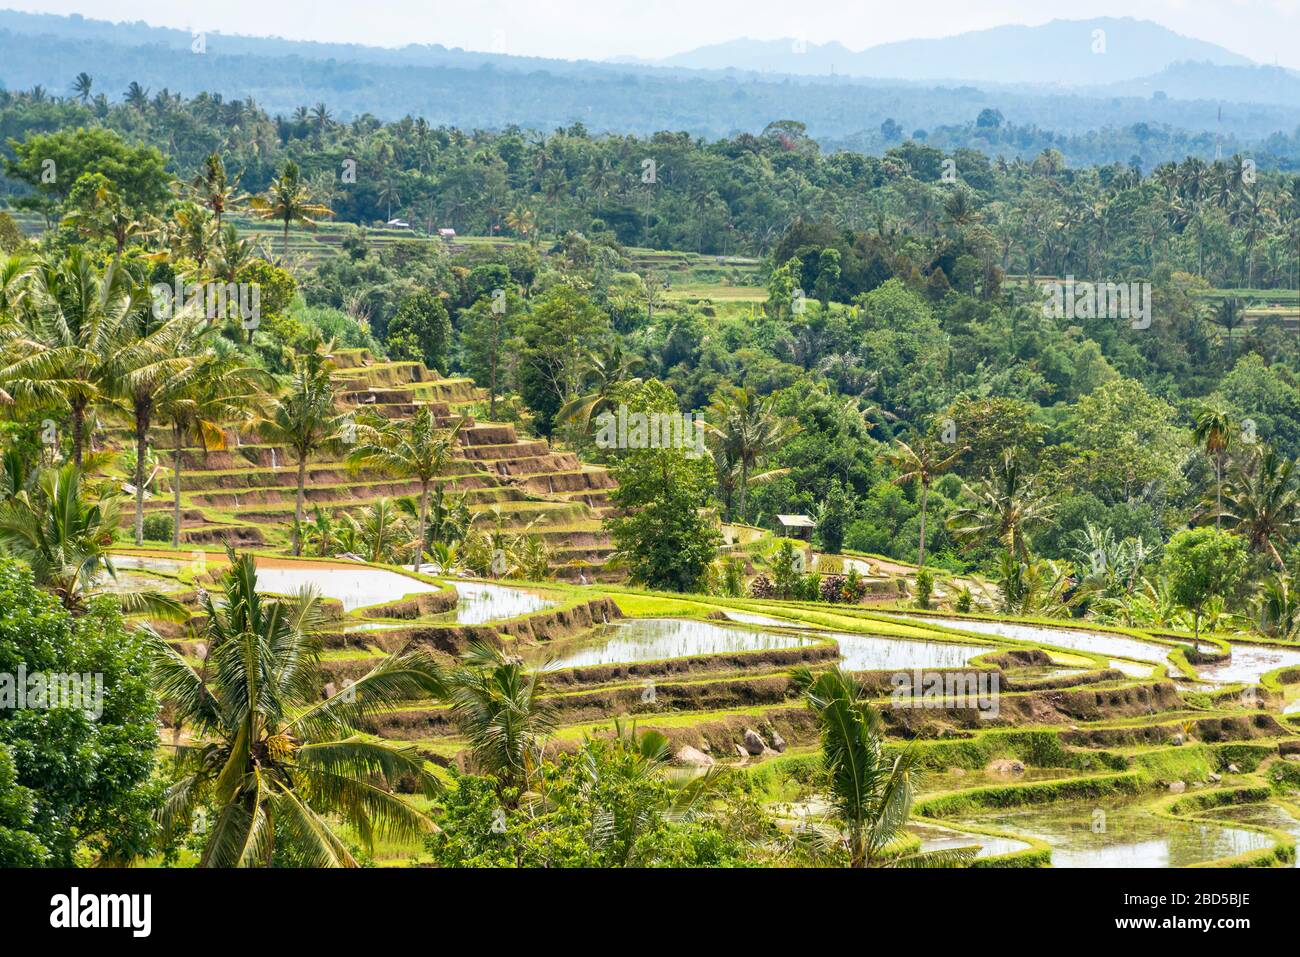 Horizontal view of the rice terraces in Bali, Indonesia. Stock Photo